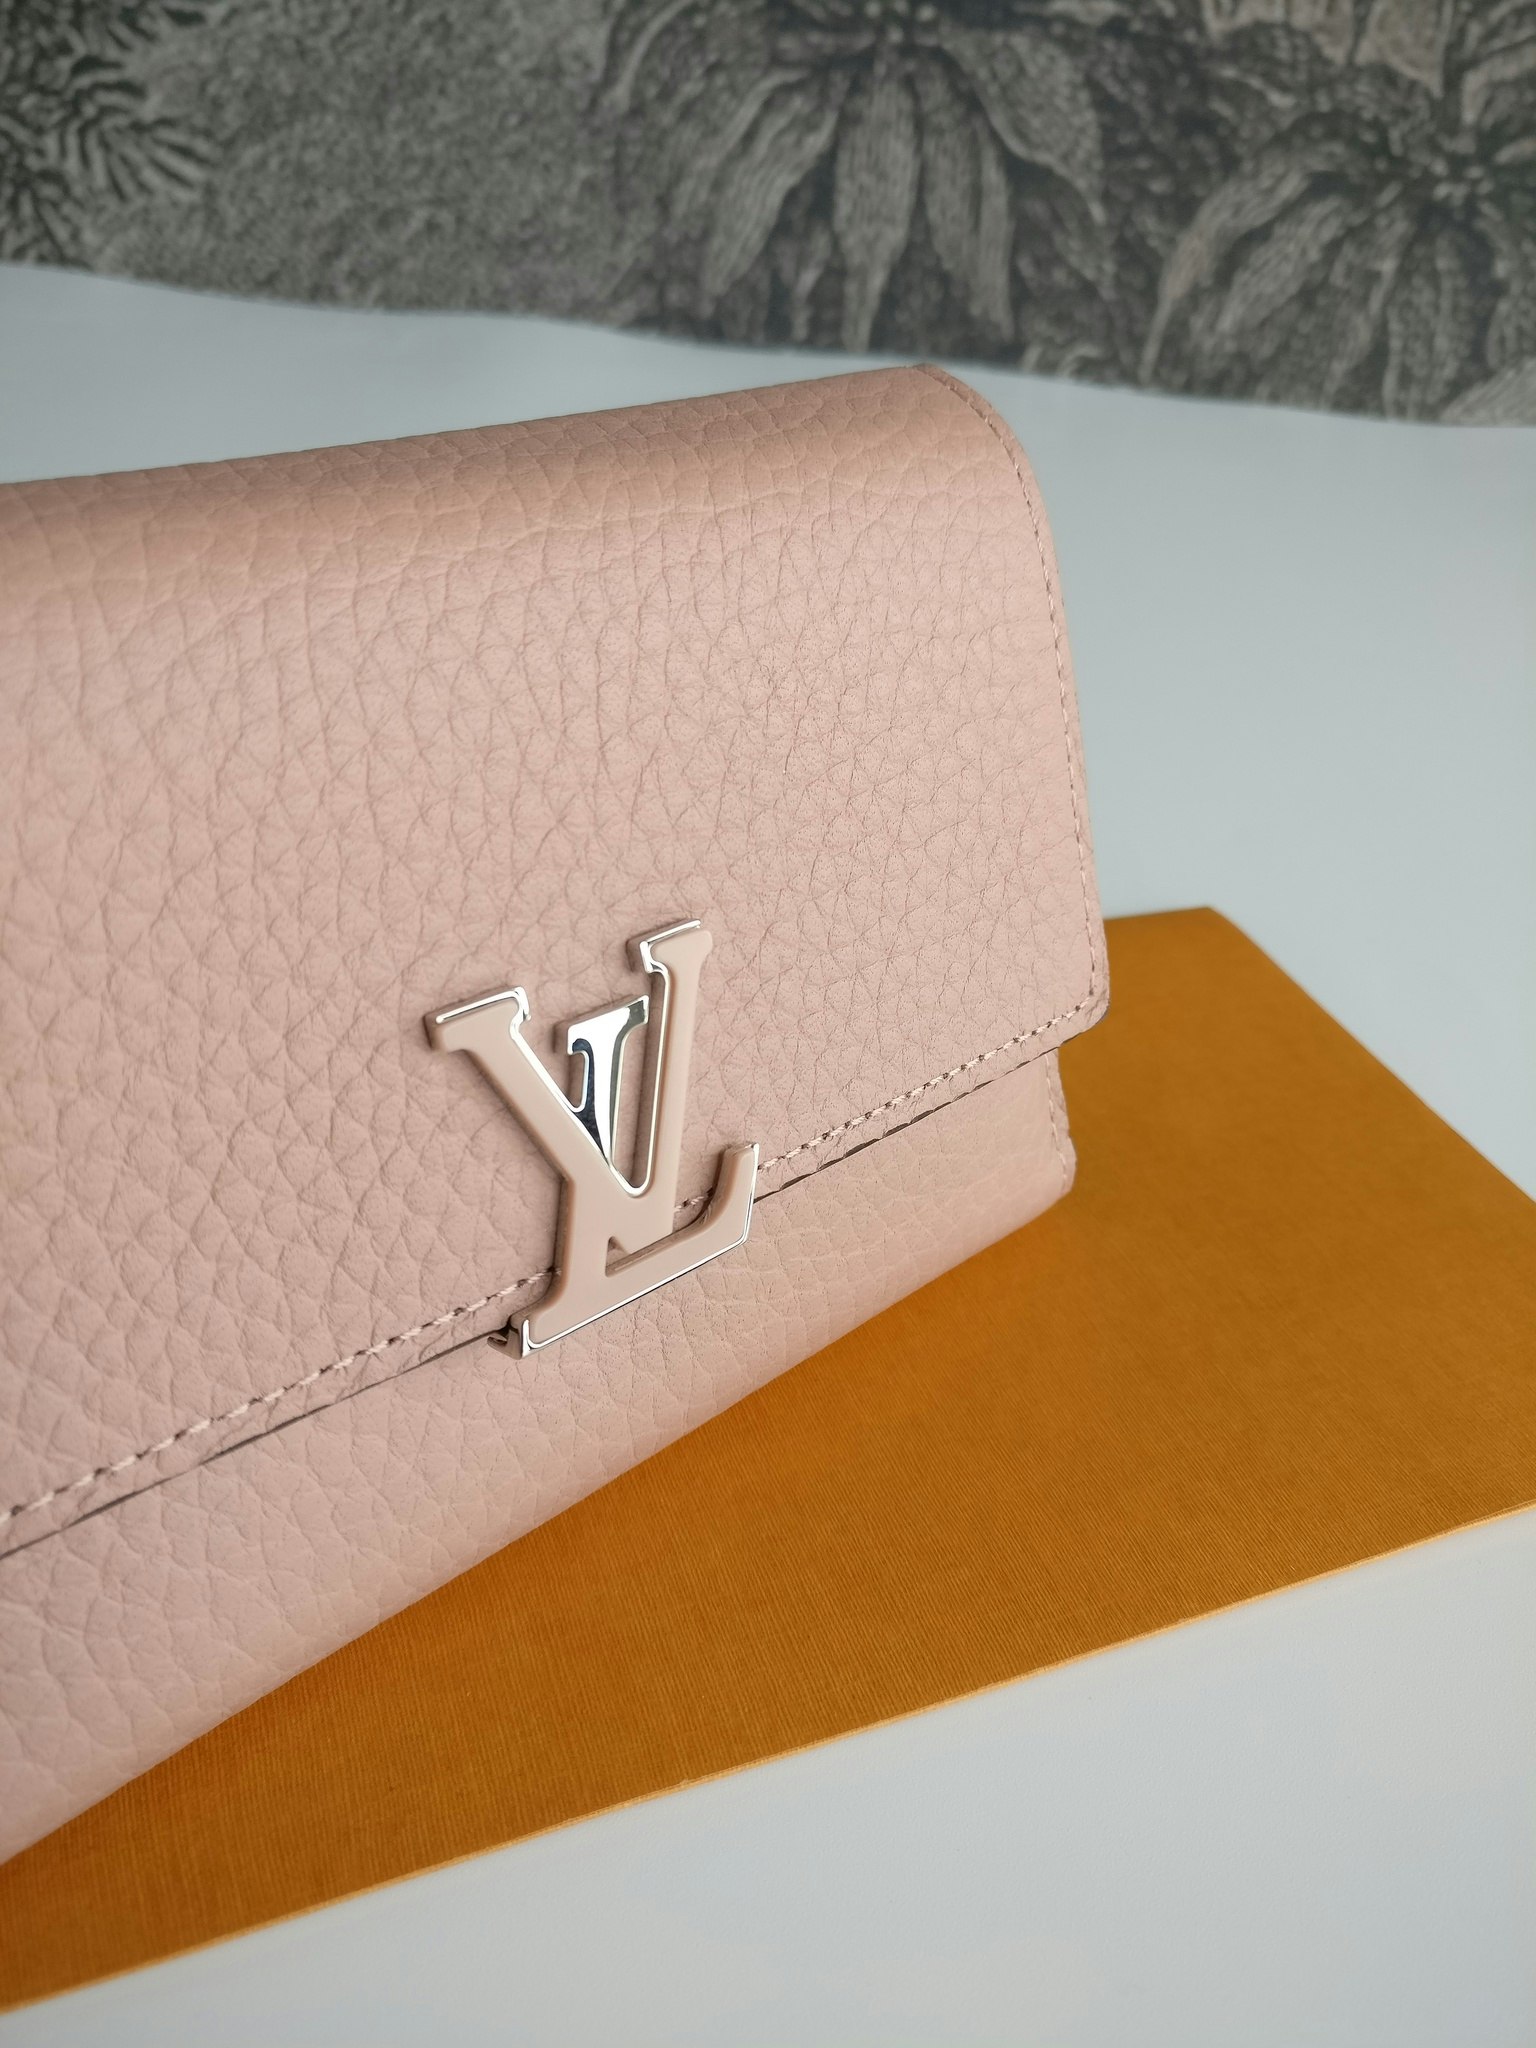 Naughtipidgins Nest - Louis Vuitton Capucines Compact Wallet in Magnolia  Pink Taurillon Leather. RRP £560 >   Capucines-Compact-Wallet-in-Magnolia-Pink-Taurillon-Leather.html